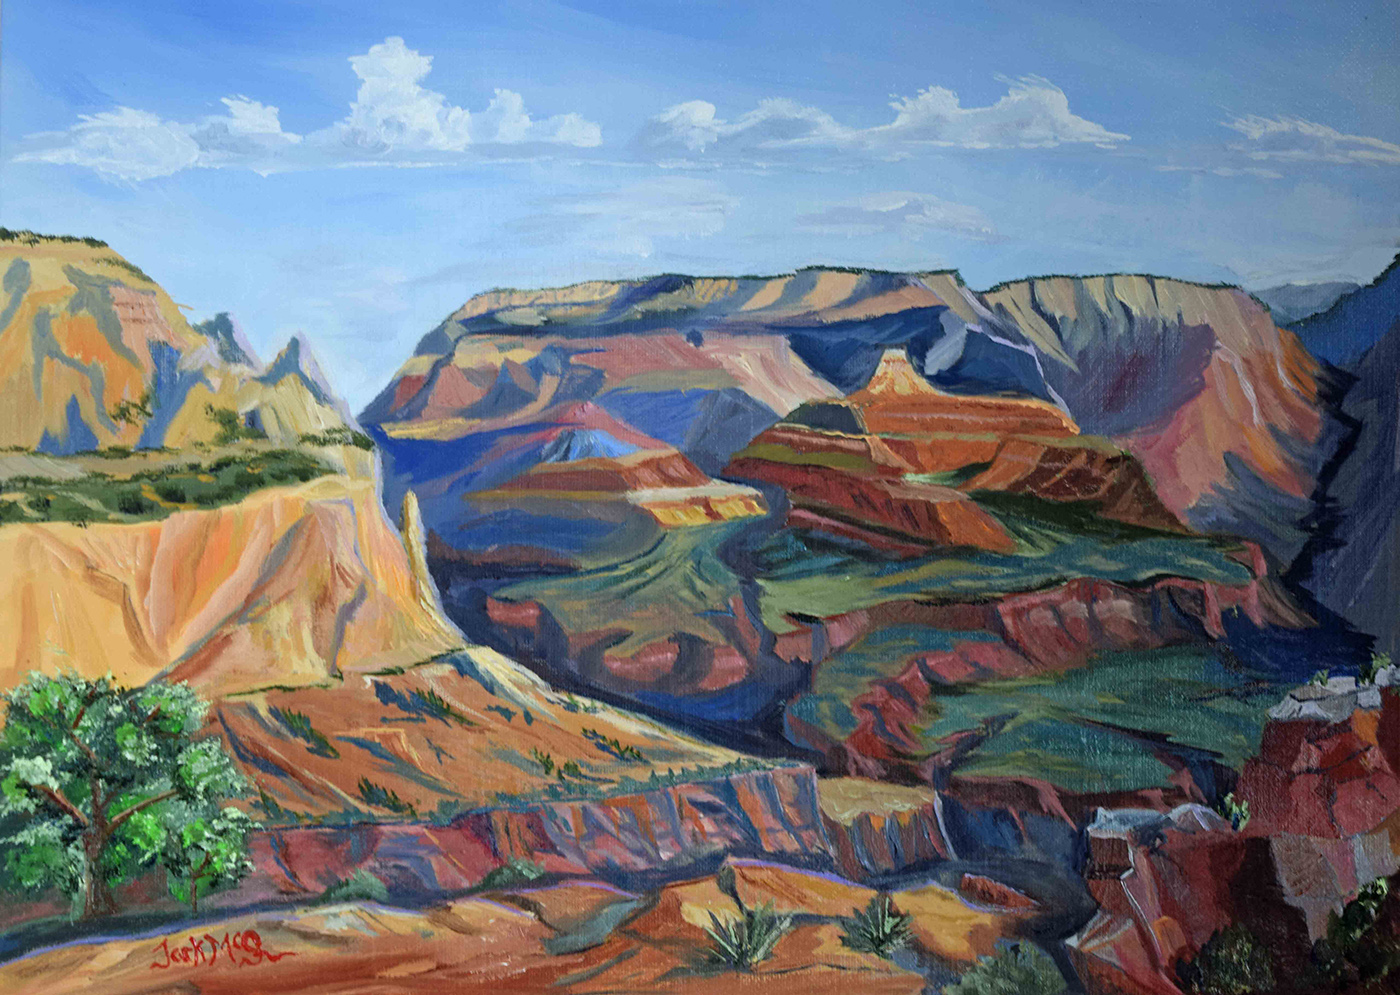 oil painting of New Mexico mountains landscape during day with shifts of colors and light playing on the folds of the mountains and plateaus 